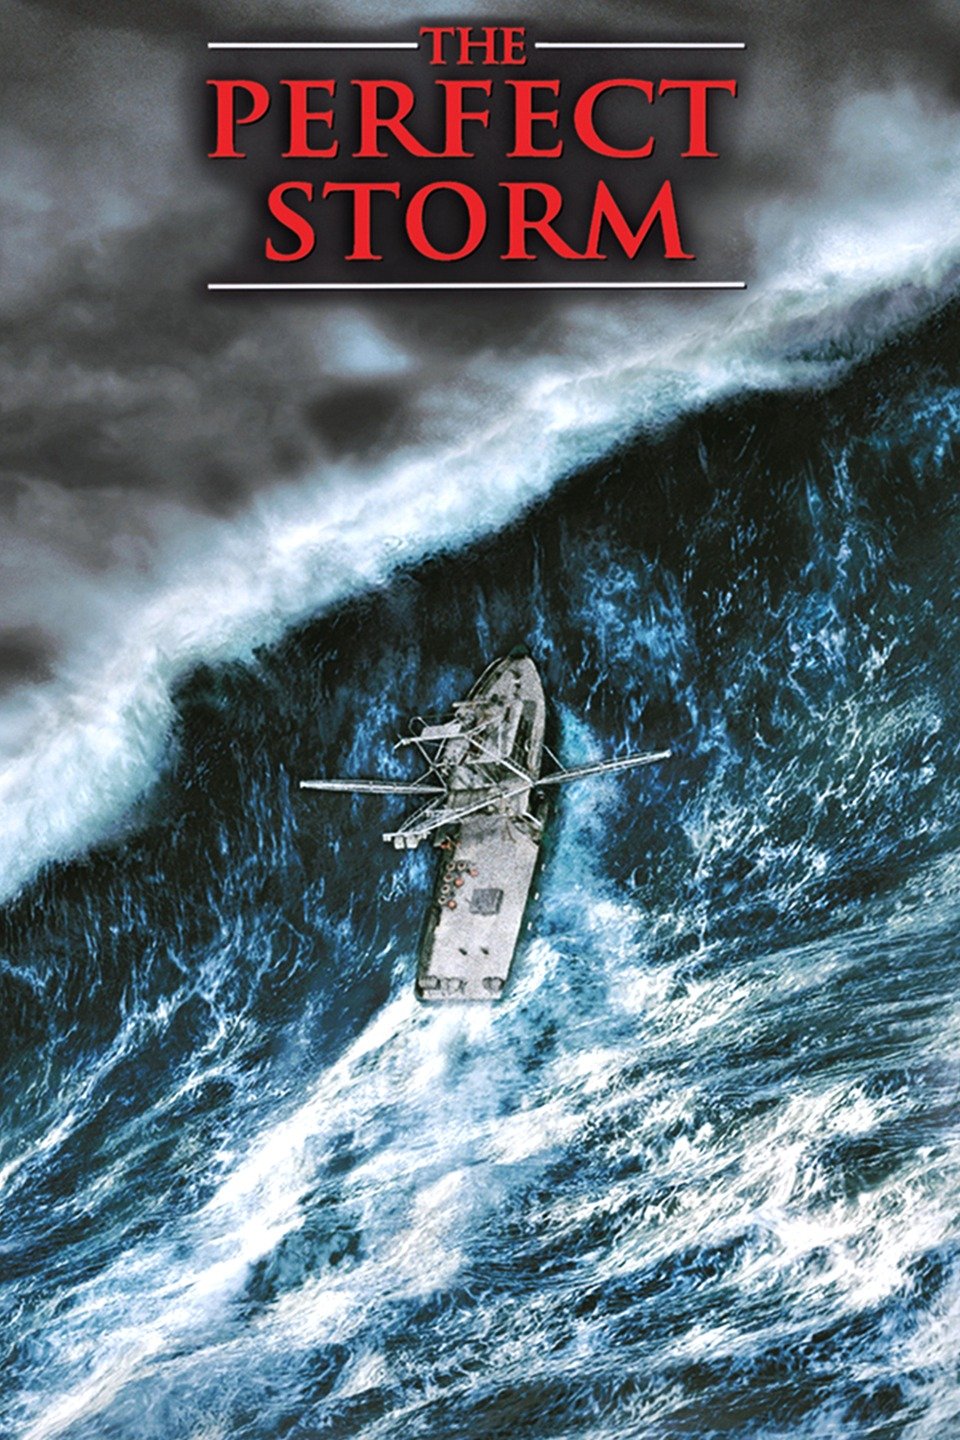 The Perfect Storm (2000) | Soundeffects Wiki | Fandom